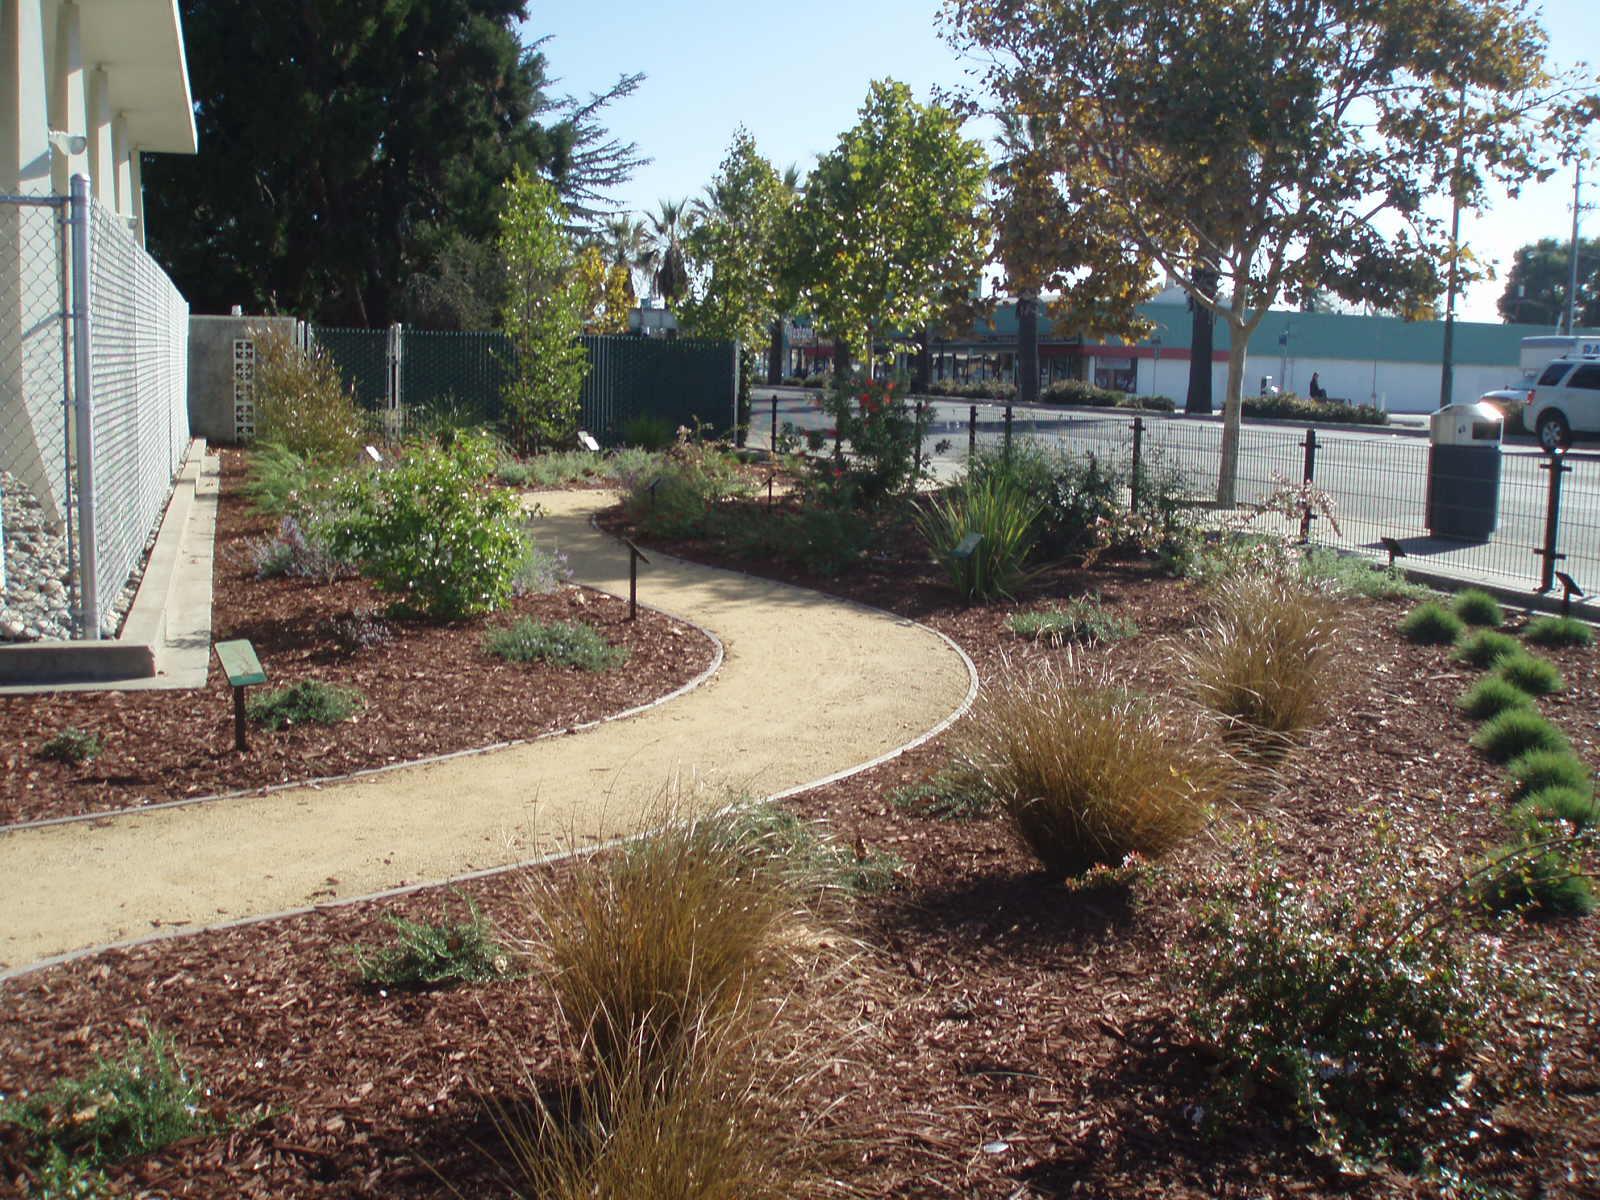 Demonstration garden with drought-resistant plants